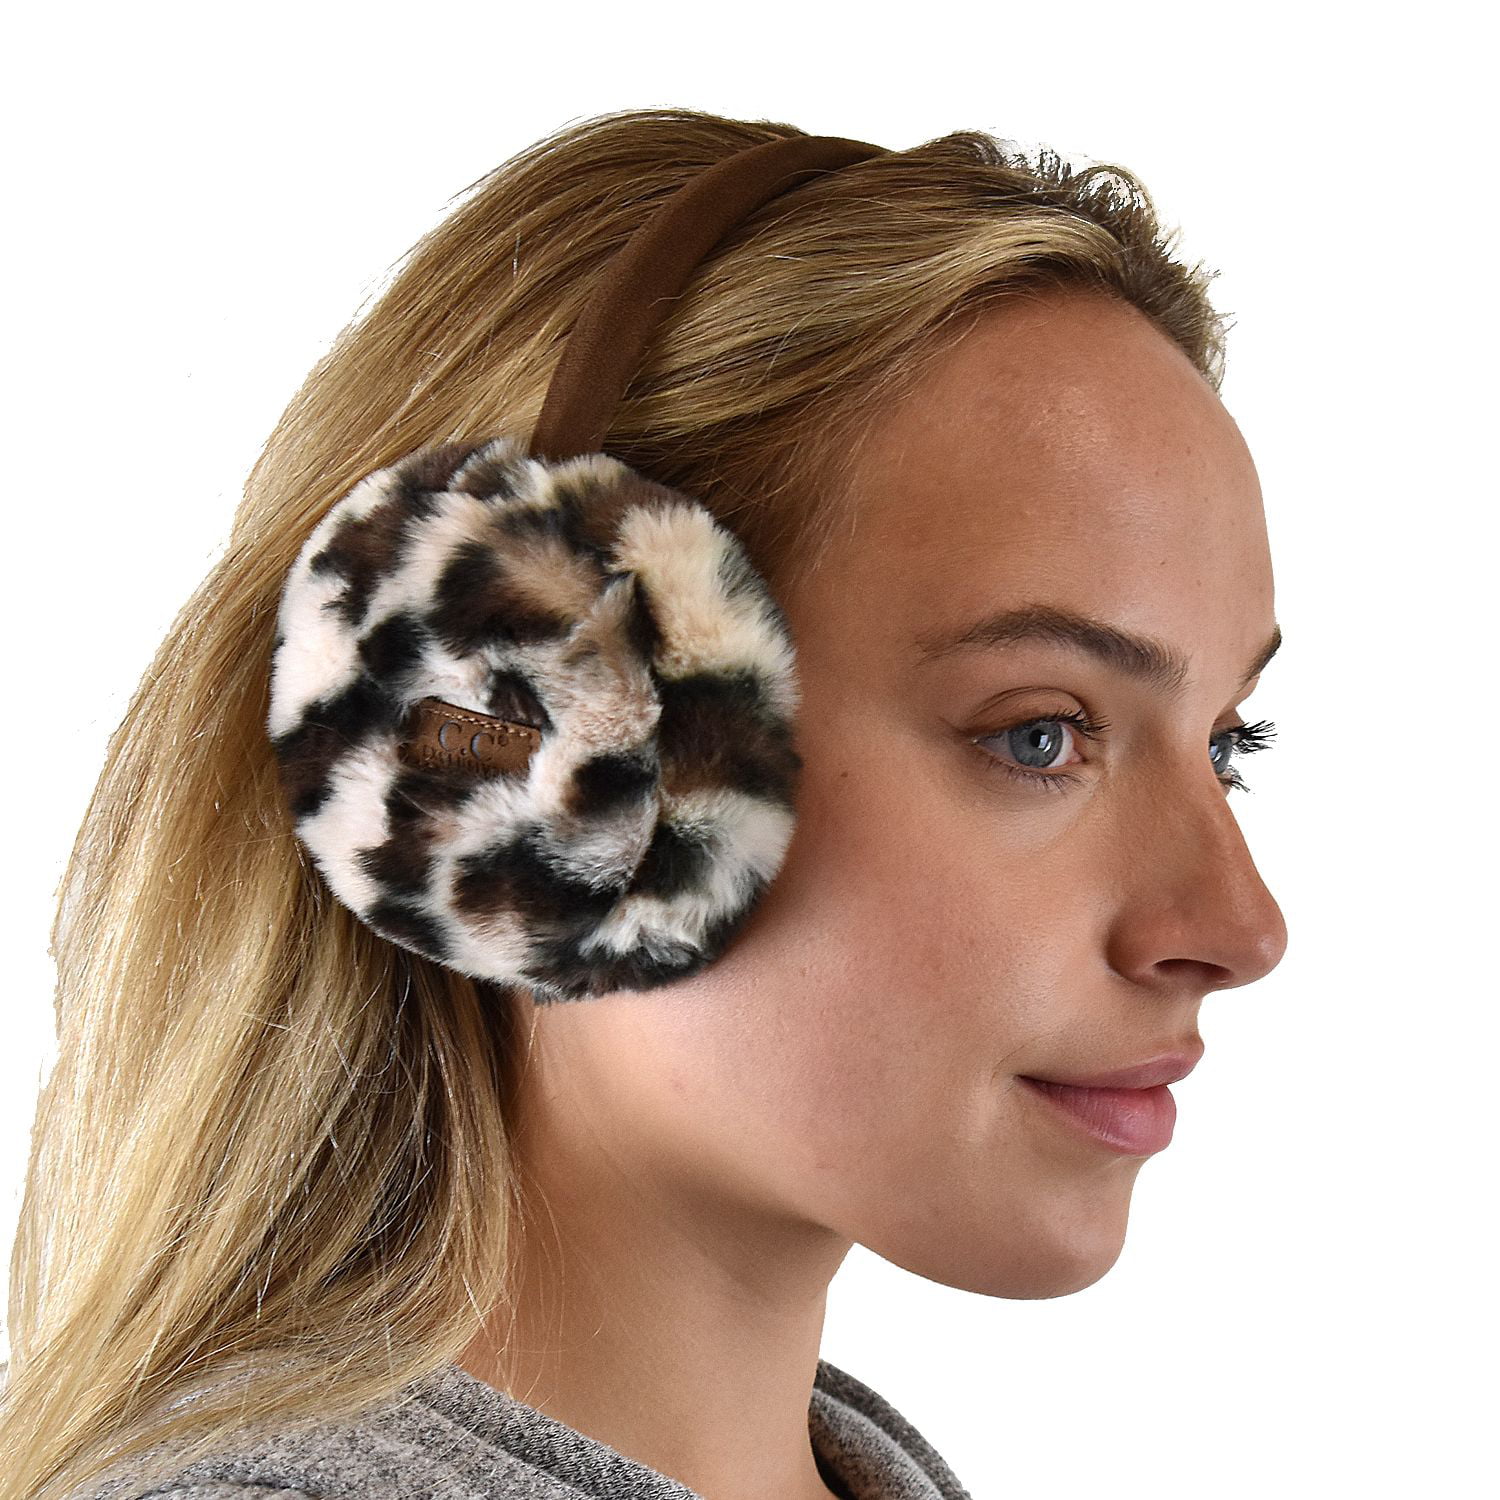 I Want A New Day Winter Earmuffs Ear Warmers Faux Fur Foldable Plush Outdoor Gift